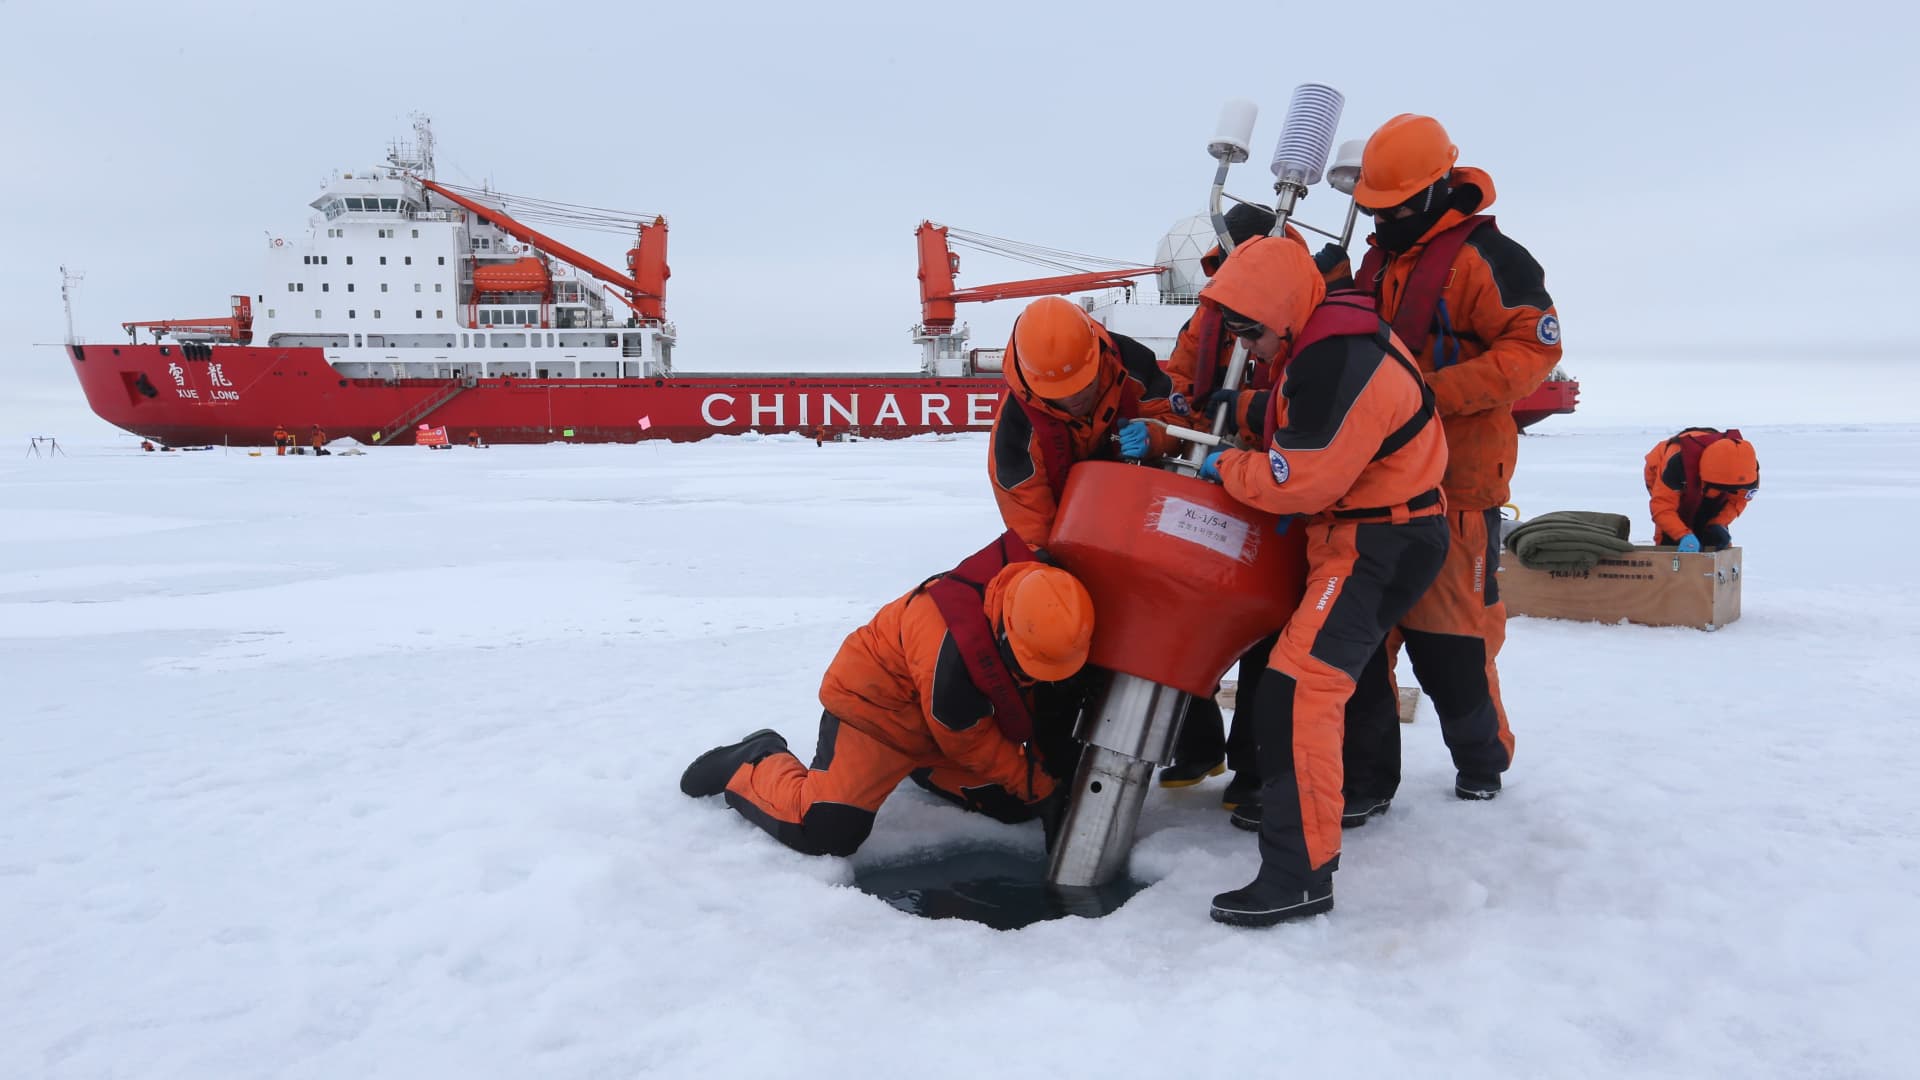 NATO is carefully monitoring the 'security implications' of China's increased presence in the Arctic